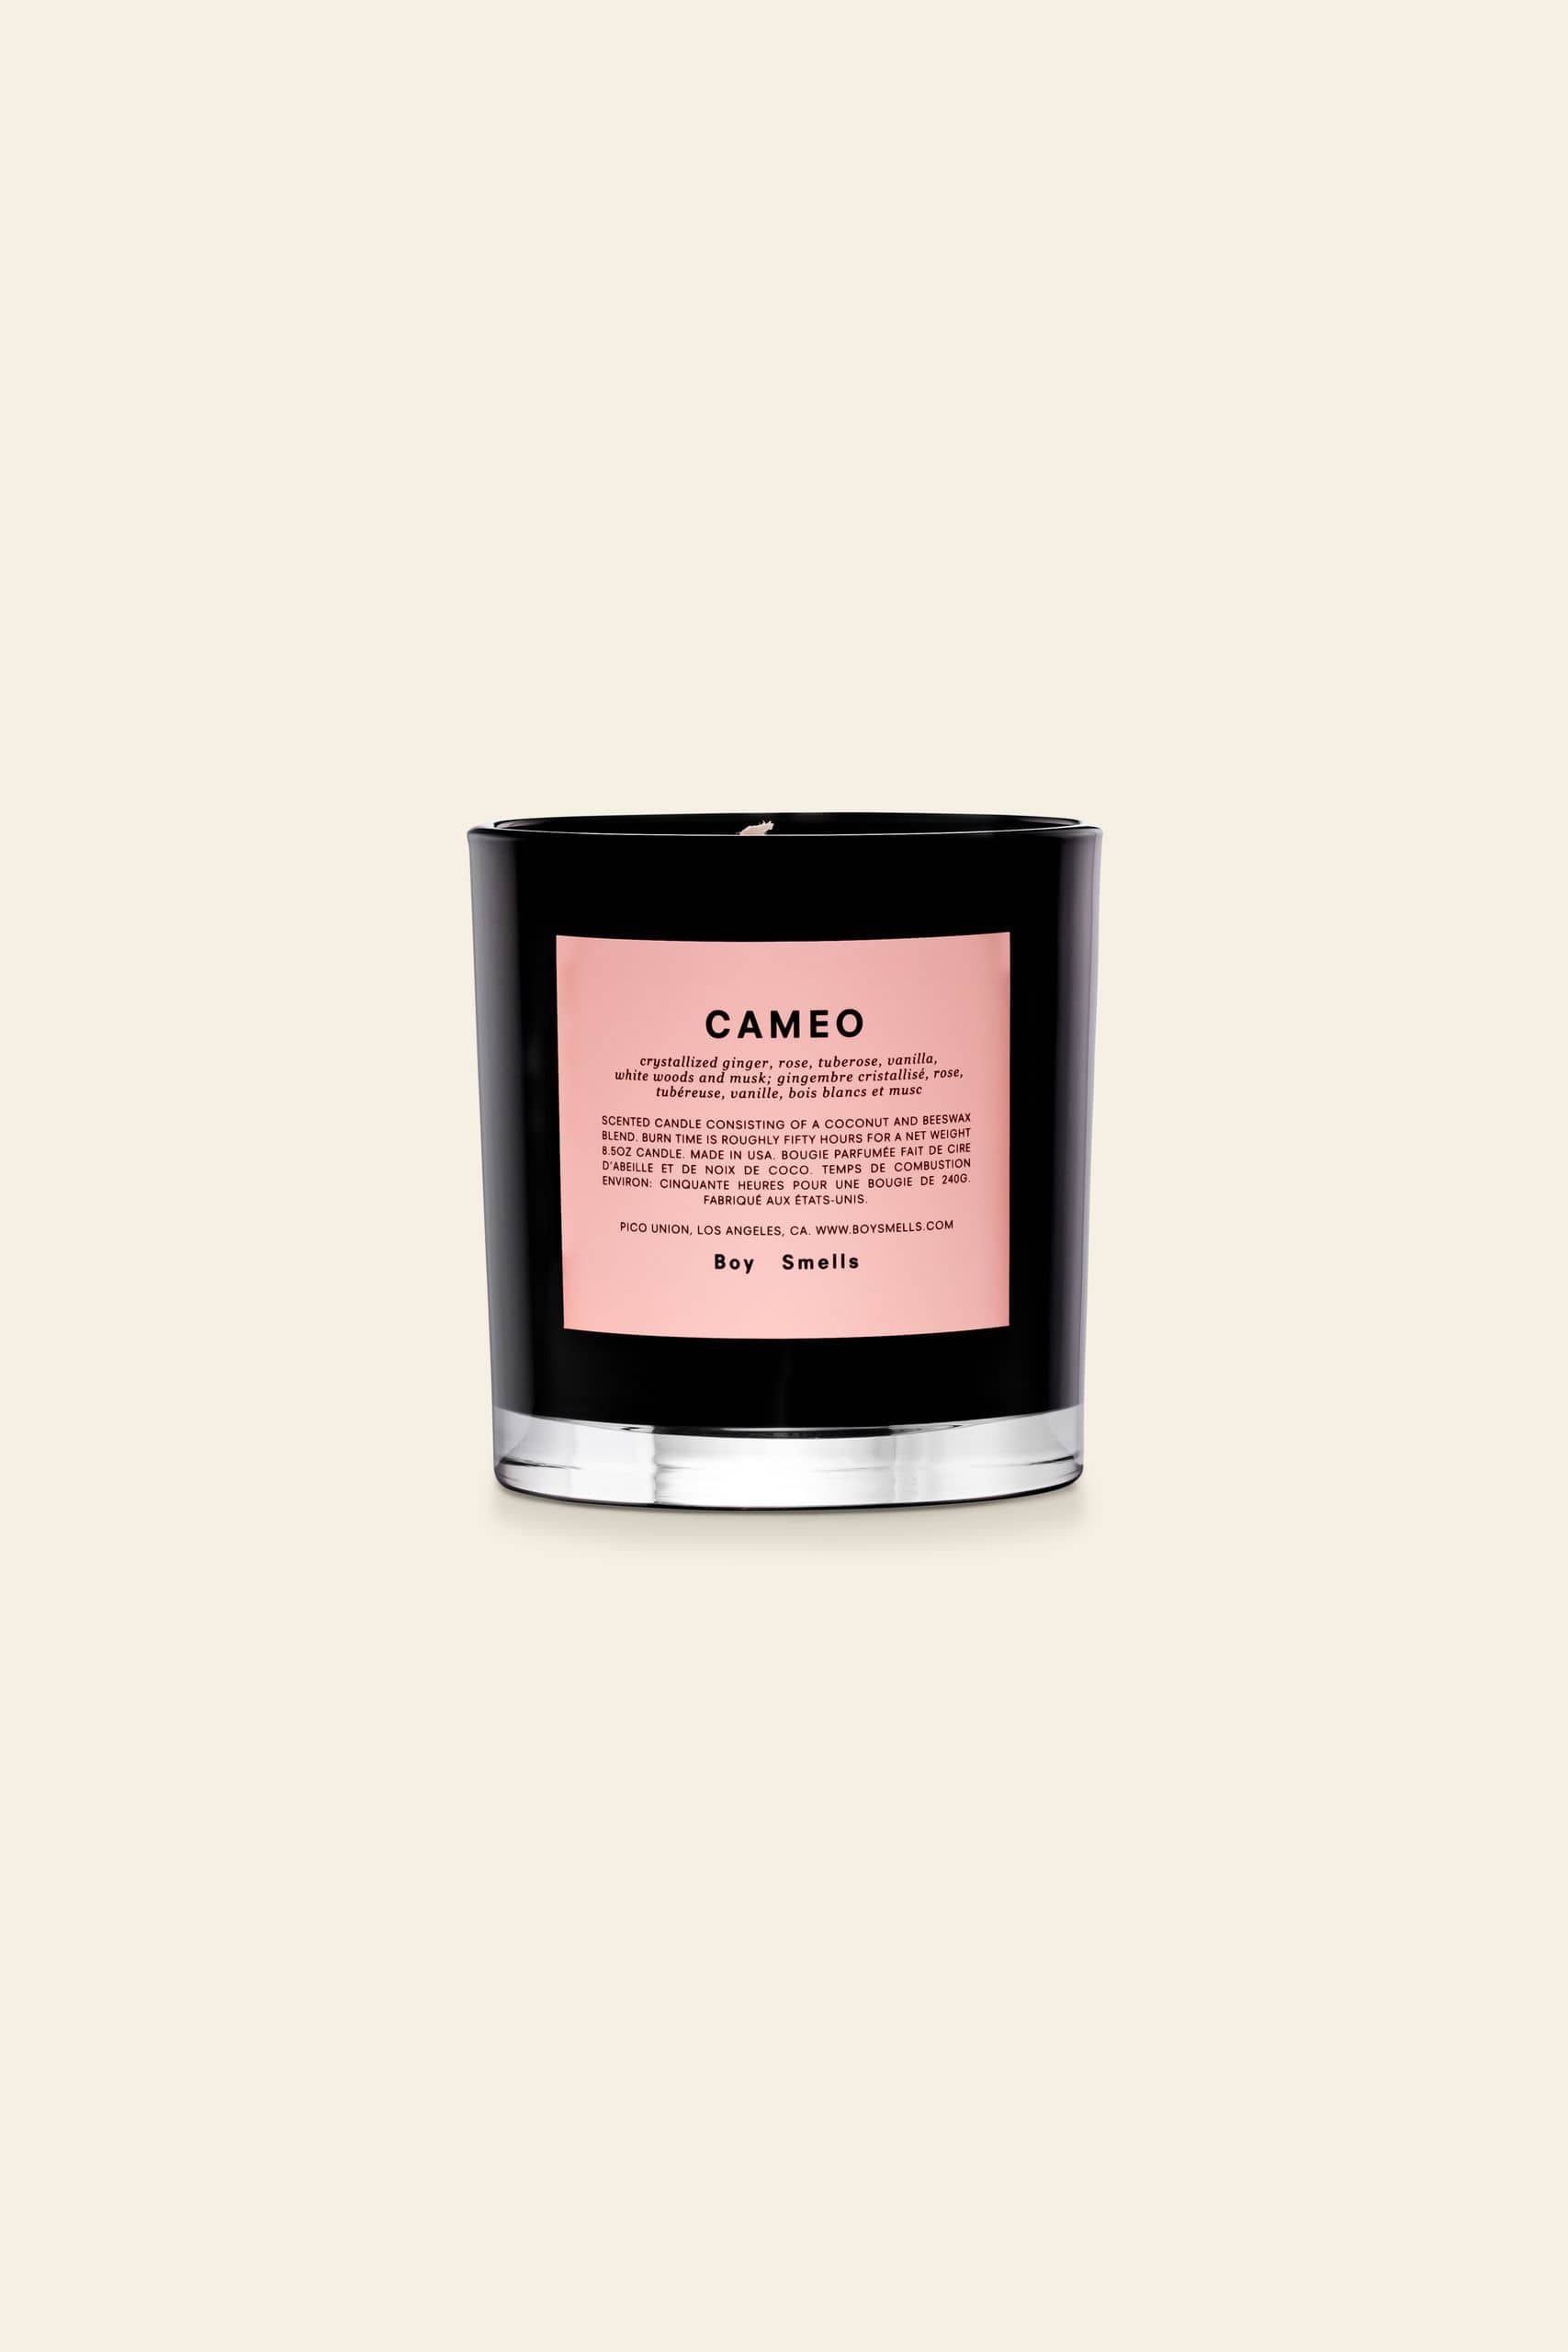 Boy Smells Cameo Scented Candle 85oz 1